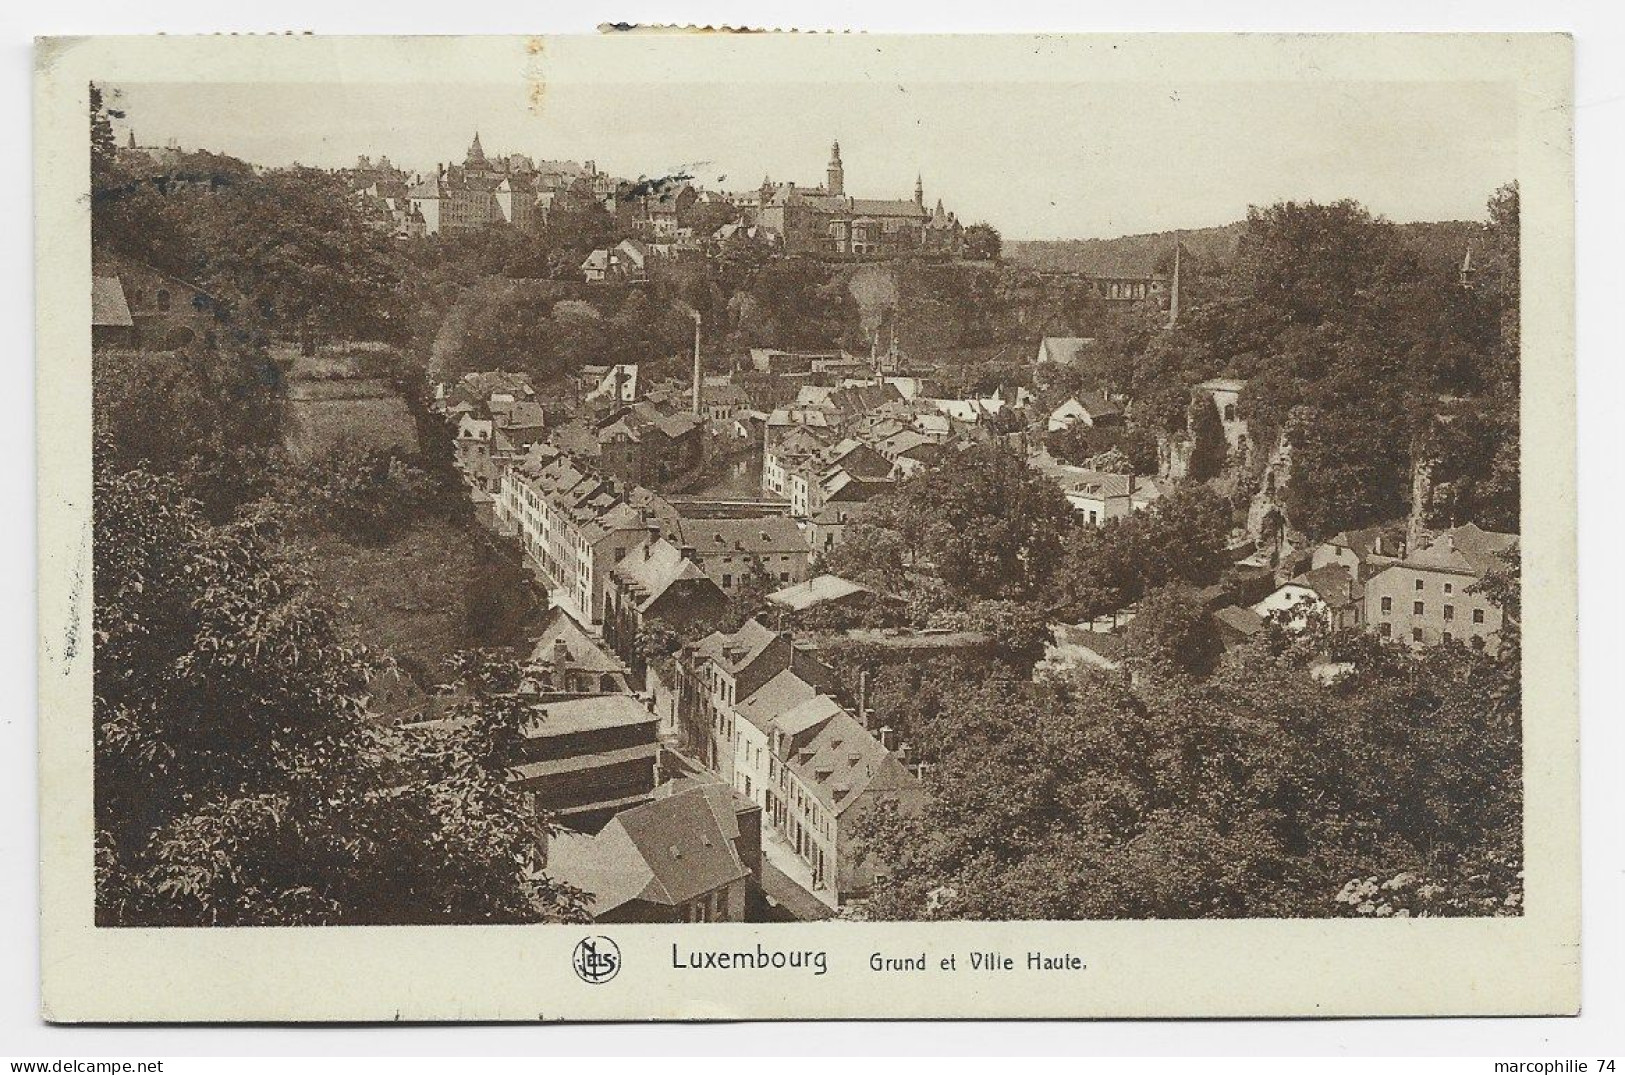 LUXEMBOURG 5C+10C+ 20C CARTE LUXEMBOURG 1933 TO FRANCE - 1926-39 Charlotte Rechtsprofil